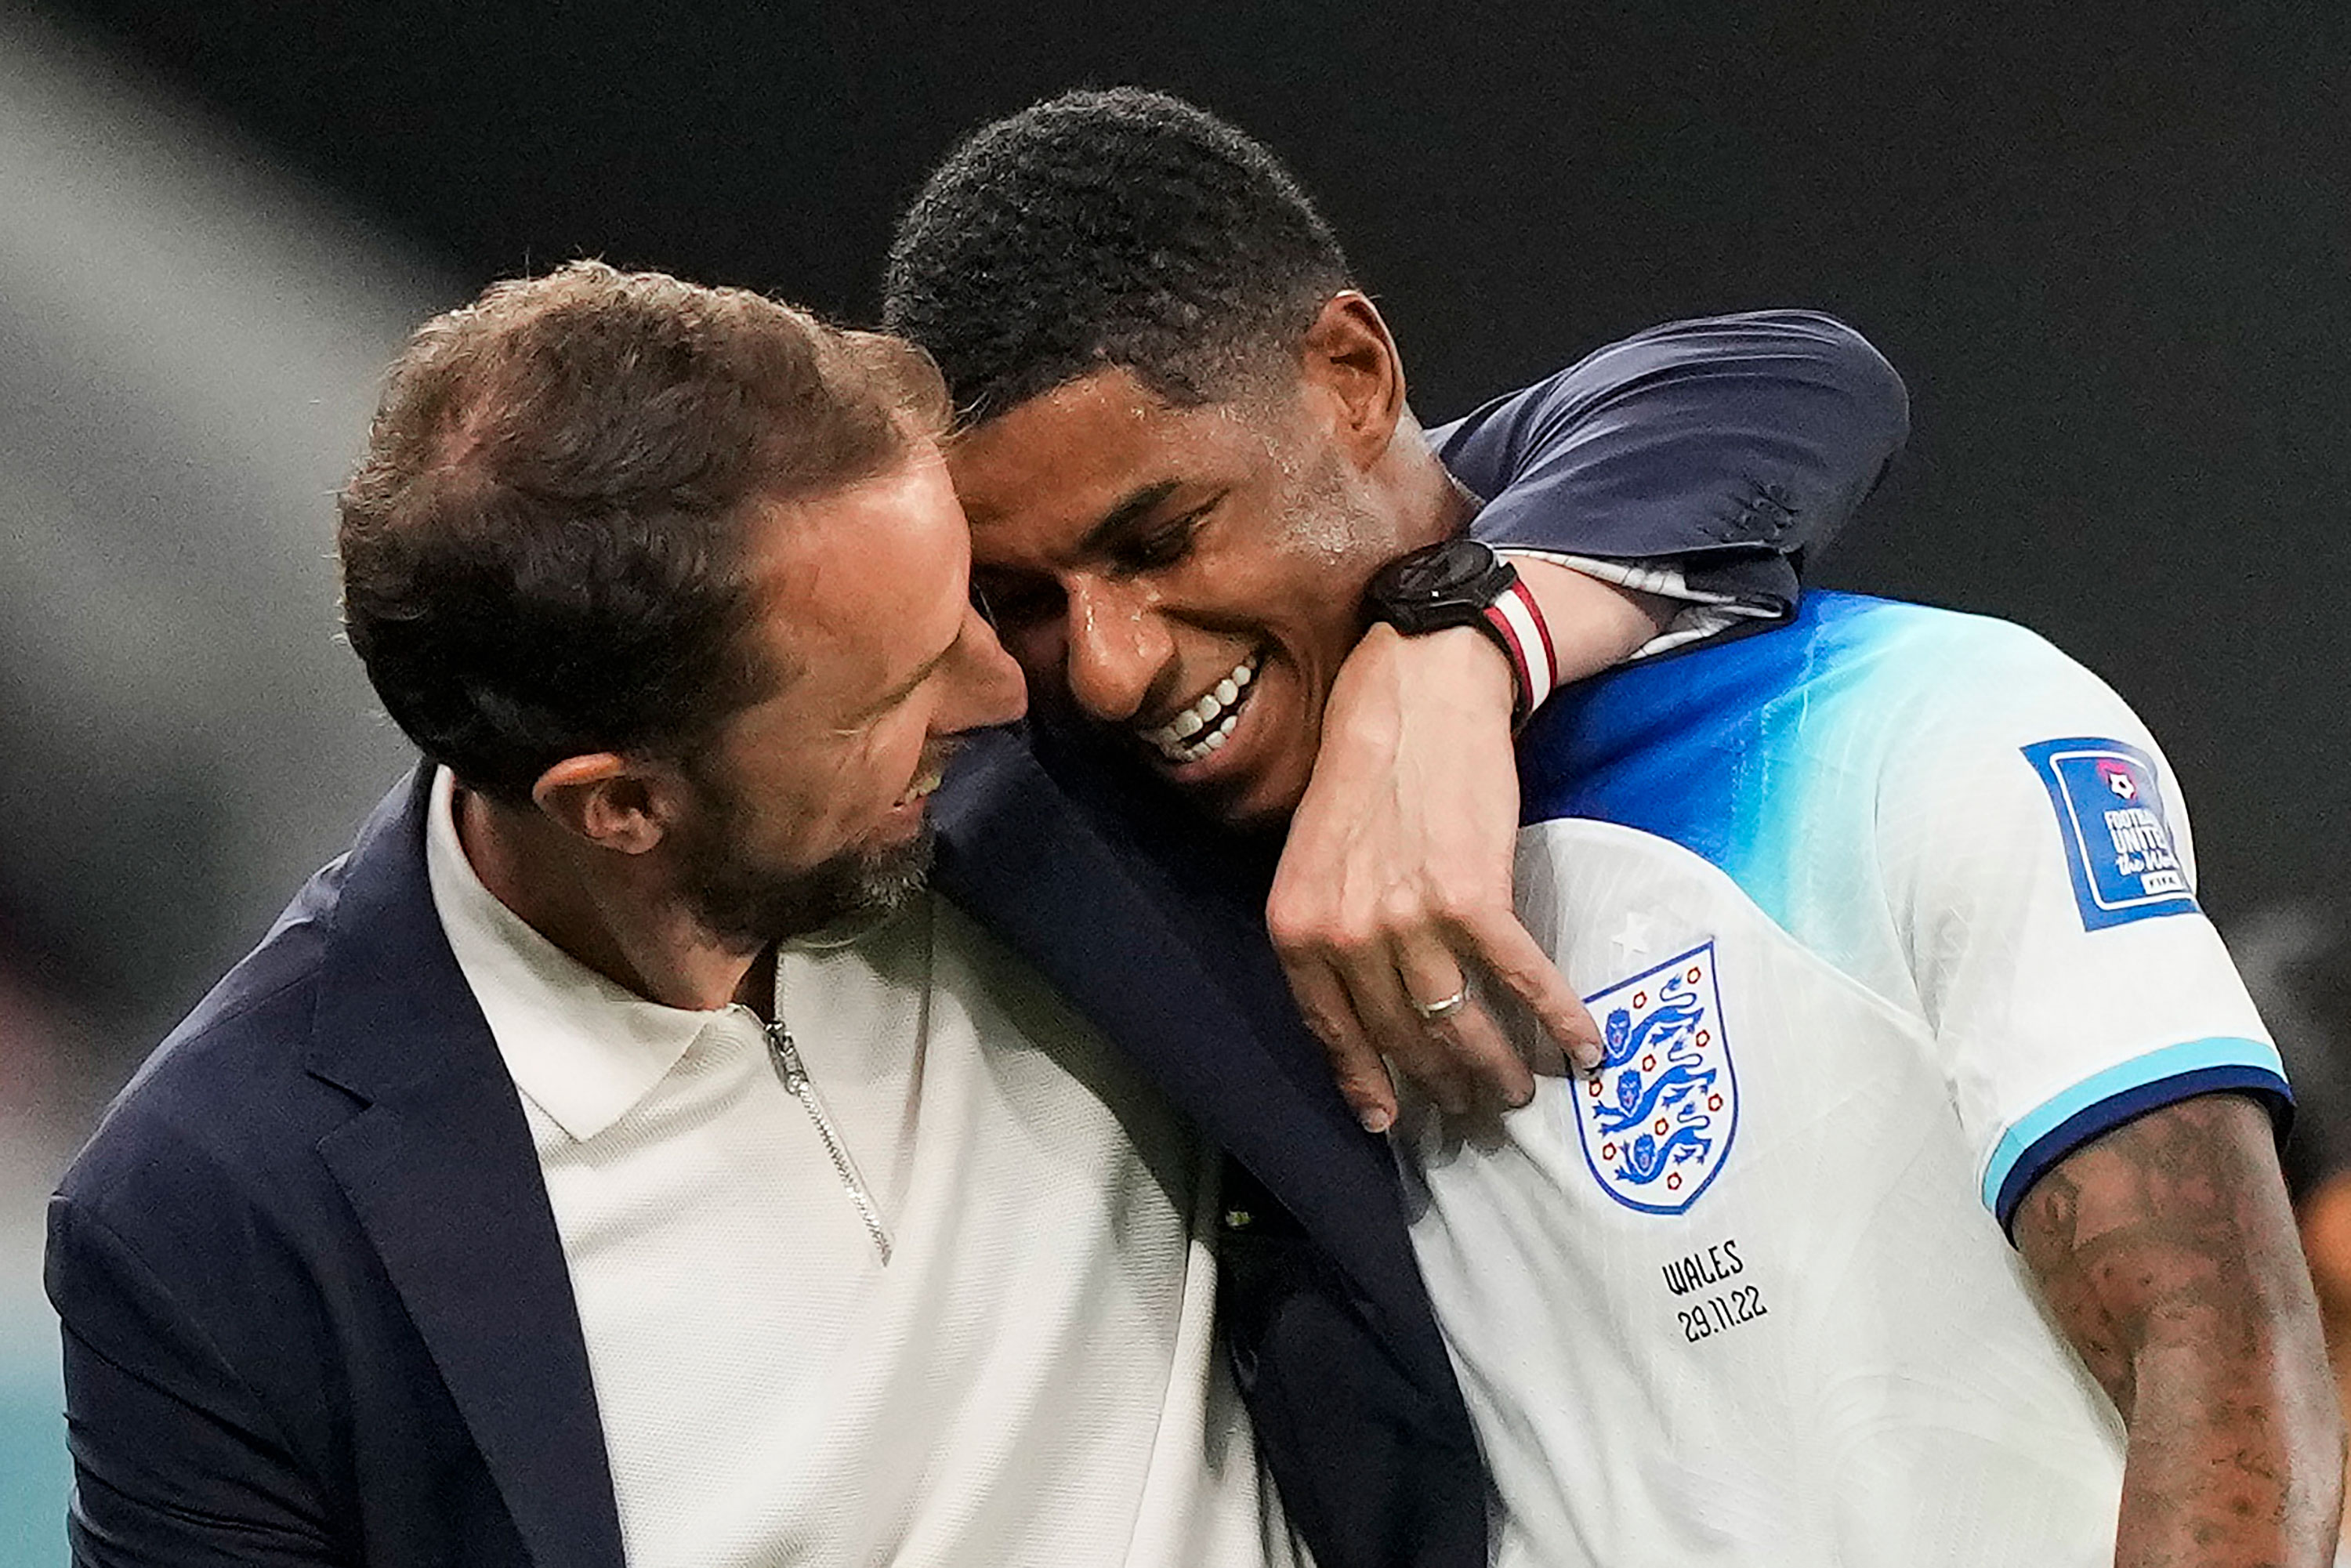 England's Marcus Rashford, right, is greeted by England's head coach Gareth Southgate as he leaves the pitch during the match against Wales.